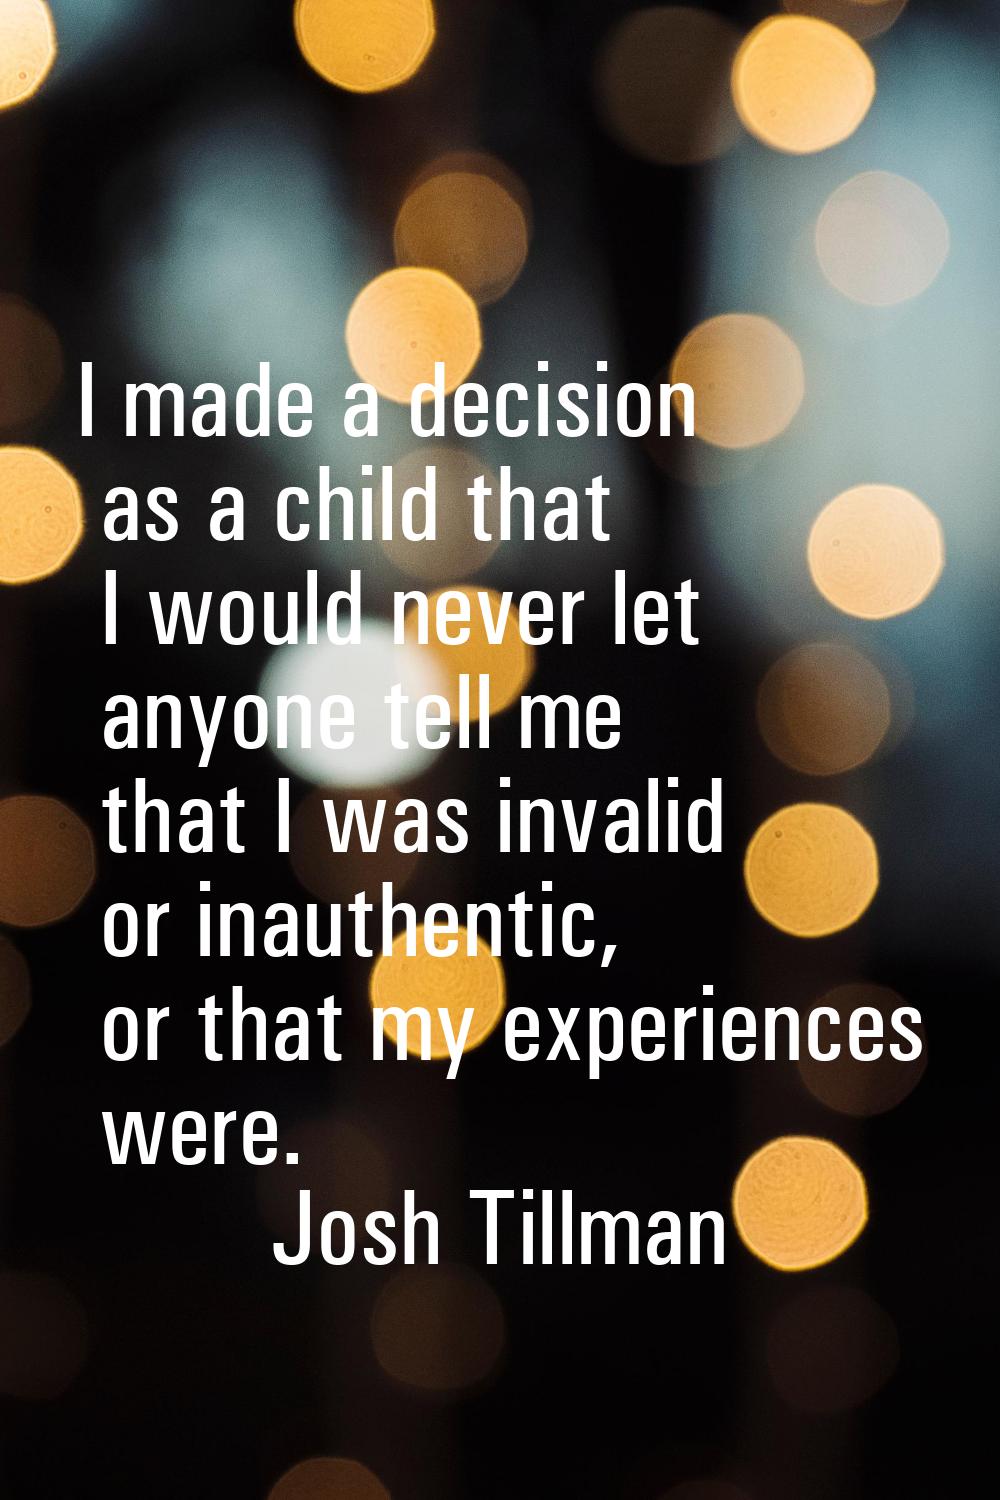 I made a decision as a child that I would never let anyone tell me that I was invalid or inauthenti